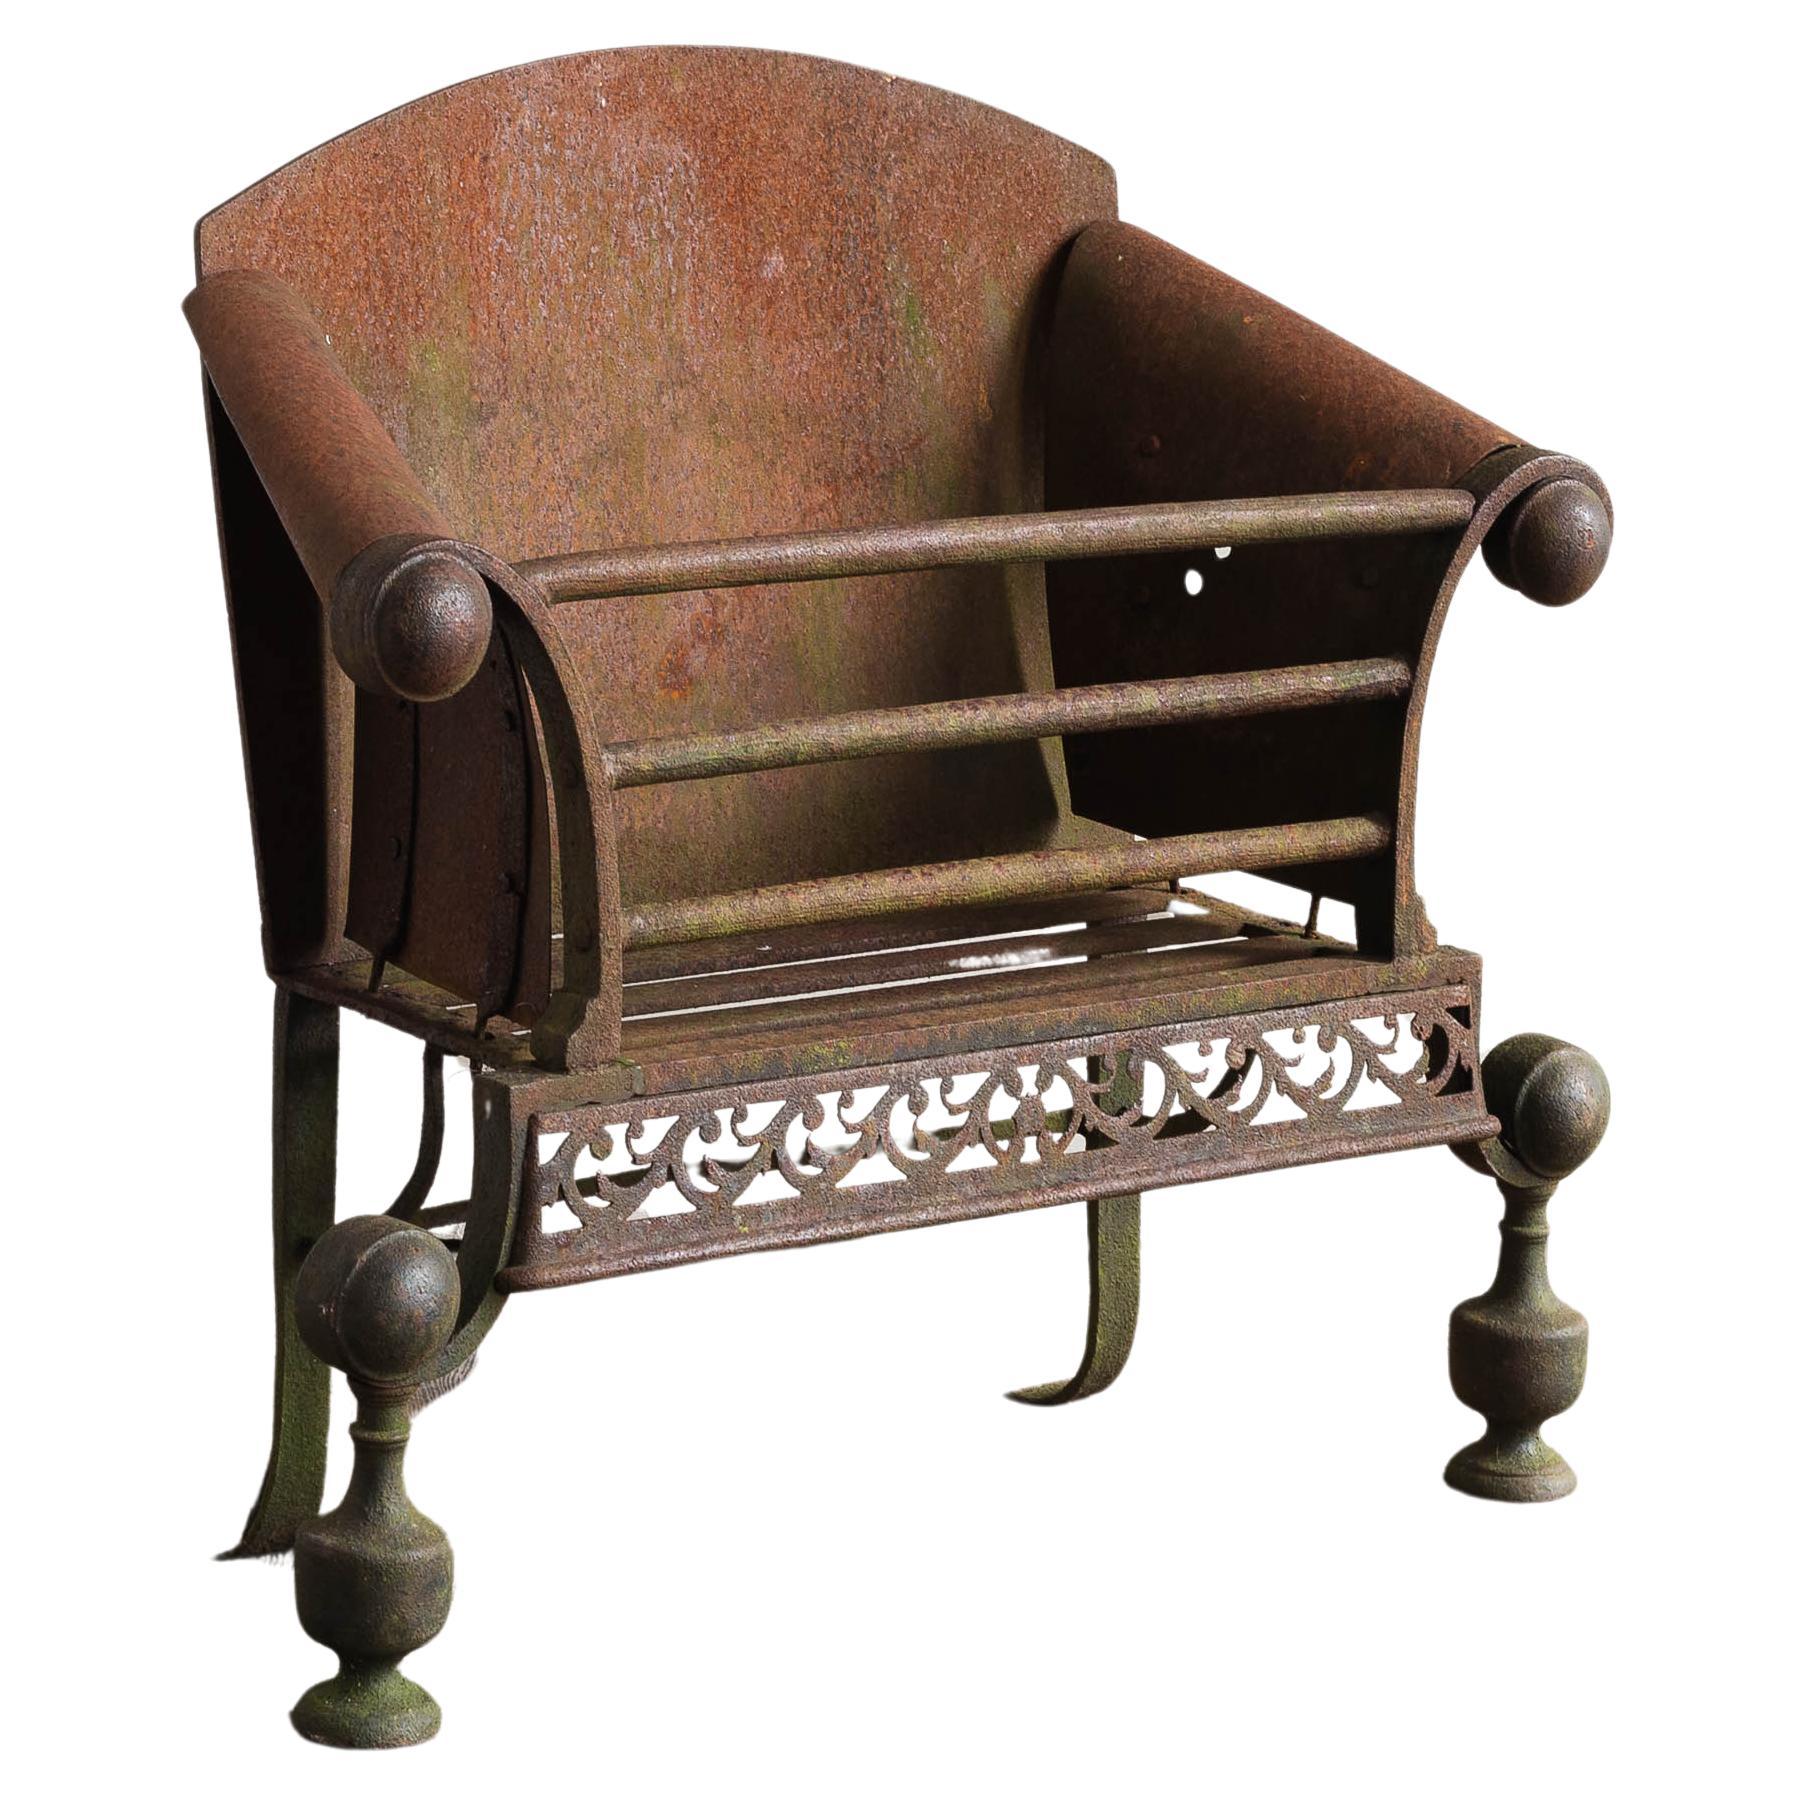 A George II Iron and Steel Fire Grate For Sale